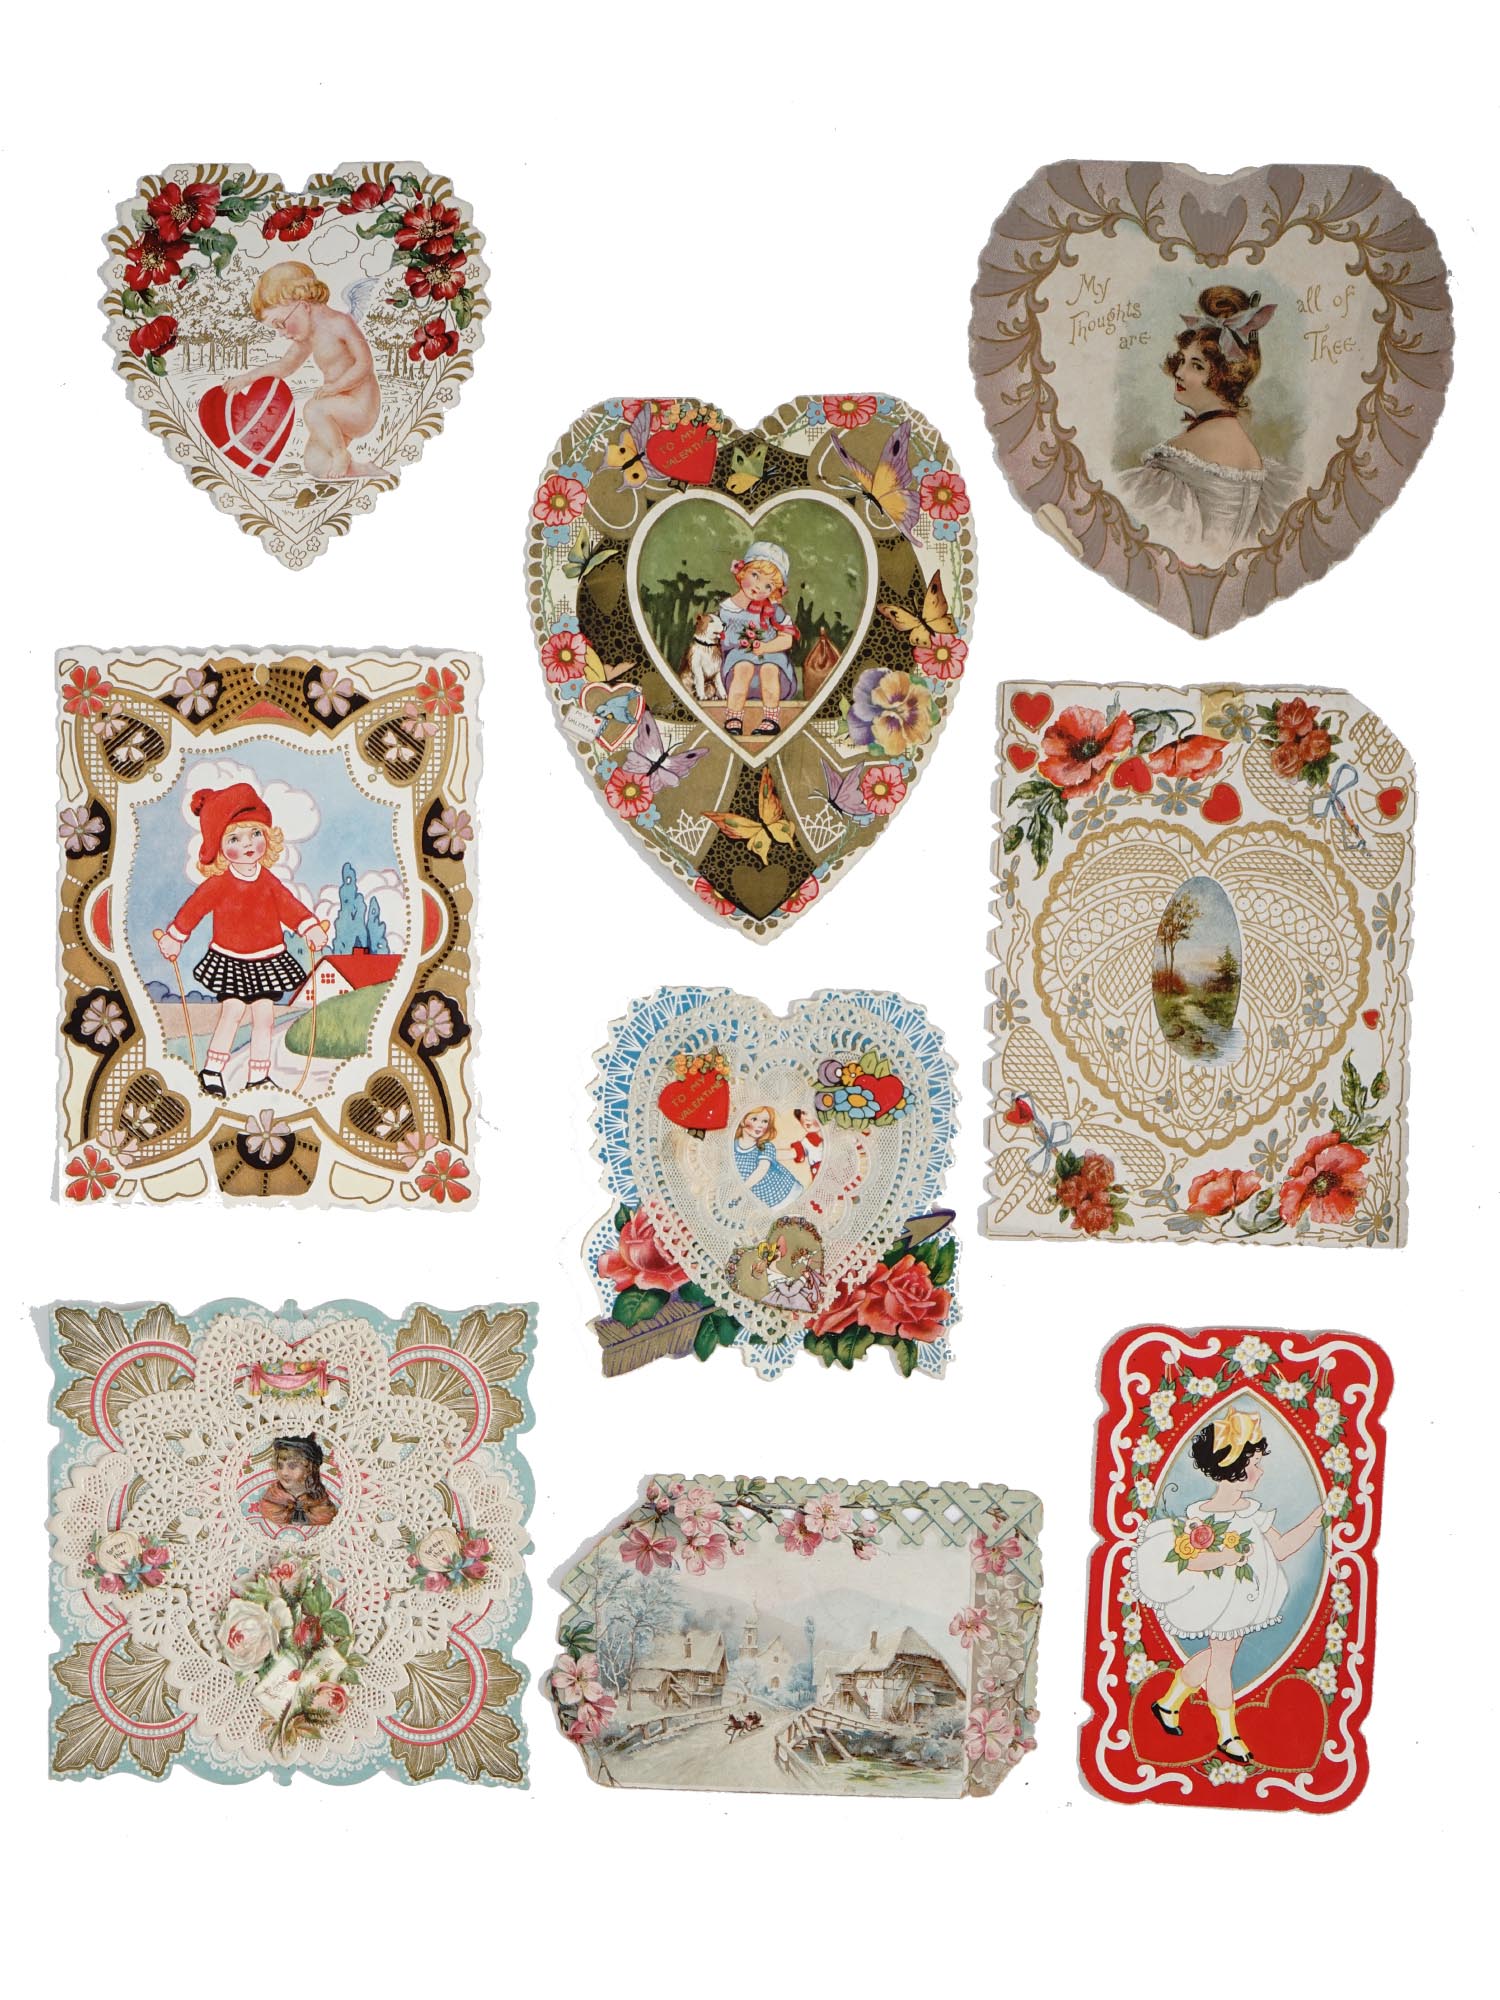 ANTIQUE VALENTINES DAY CARDS COLLECTION IN ALBUM PIC-8